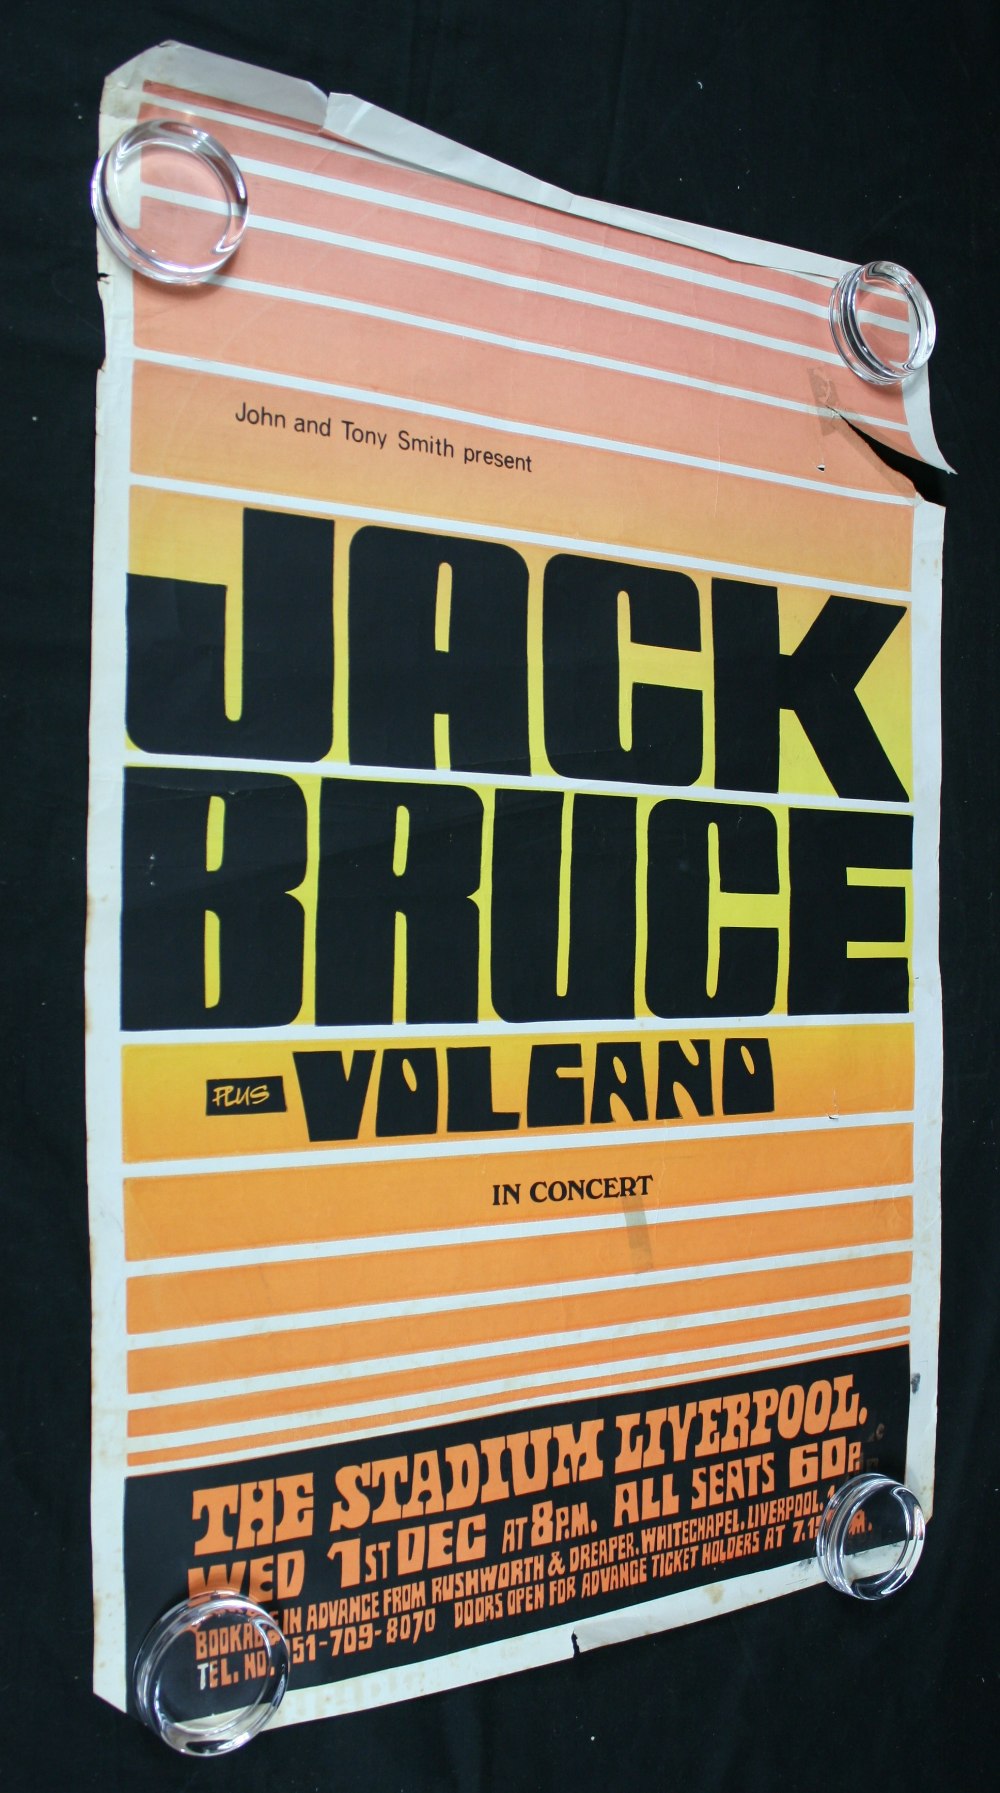 JACK BRUCE / VOLCANO - poster from the performance at The Liverpool Stadium on 1st Dec 1971. Black